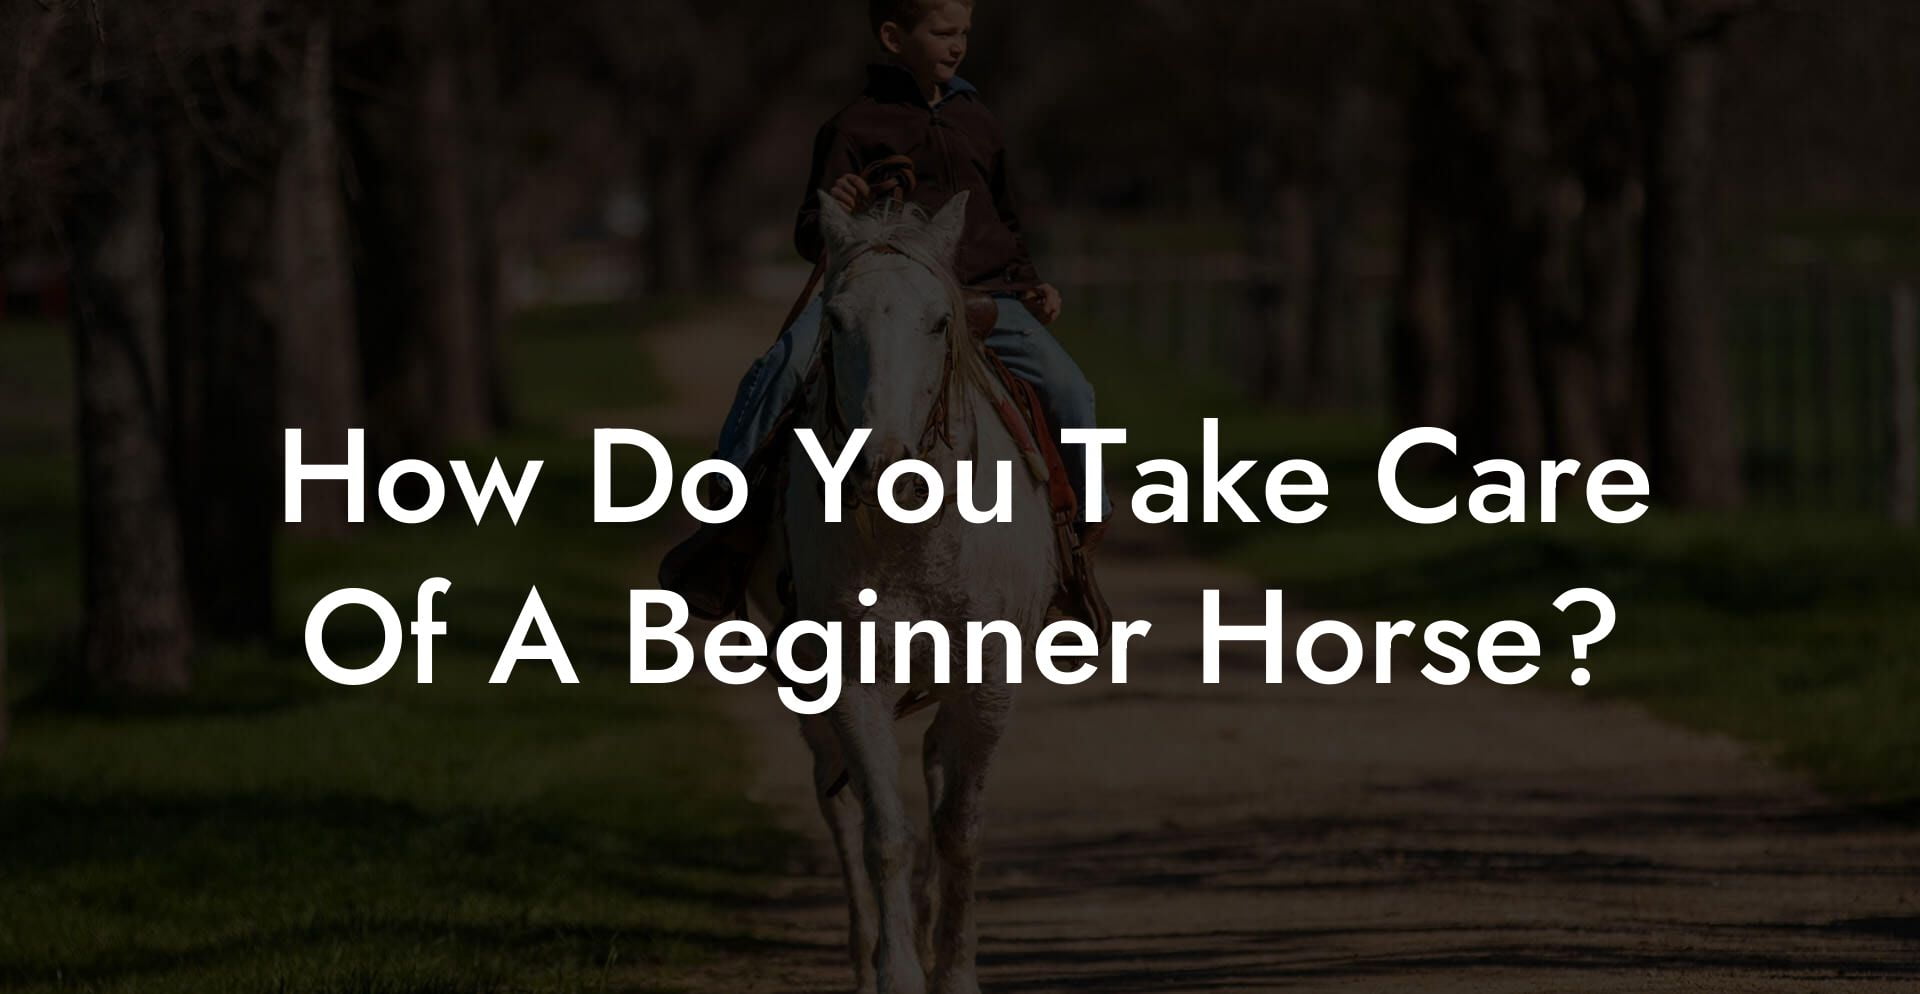 How Do You Take Care Of A Beginner Horse?